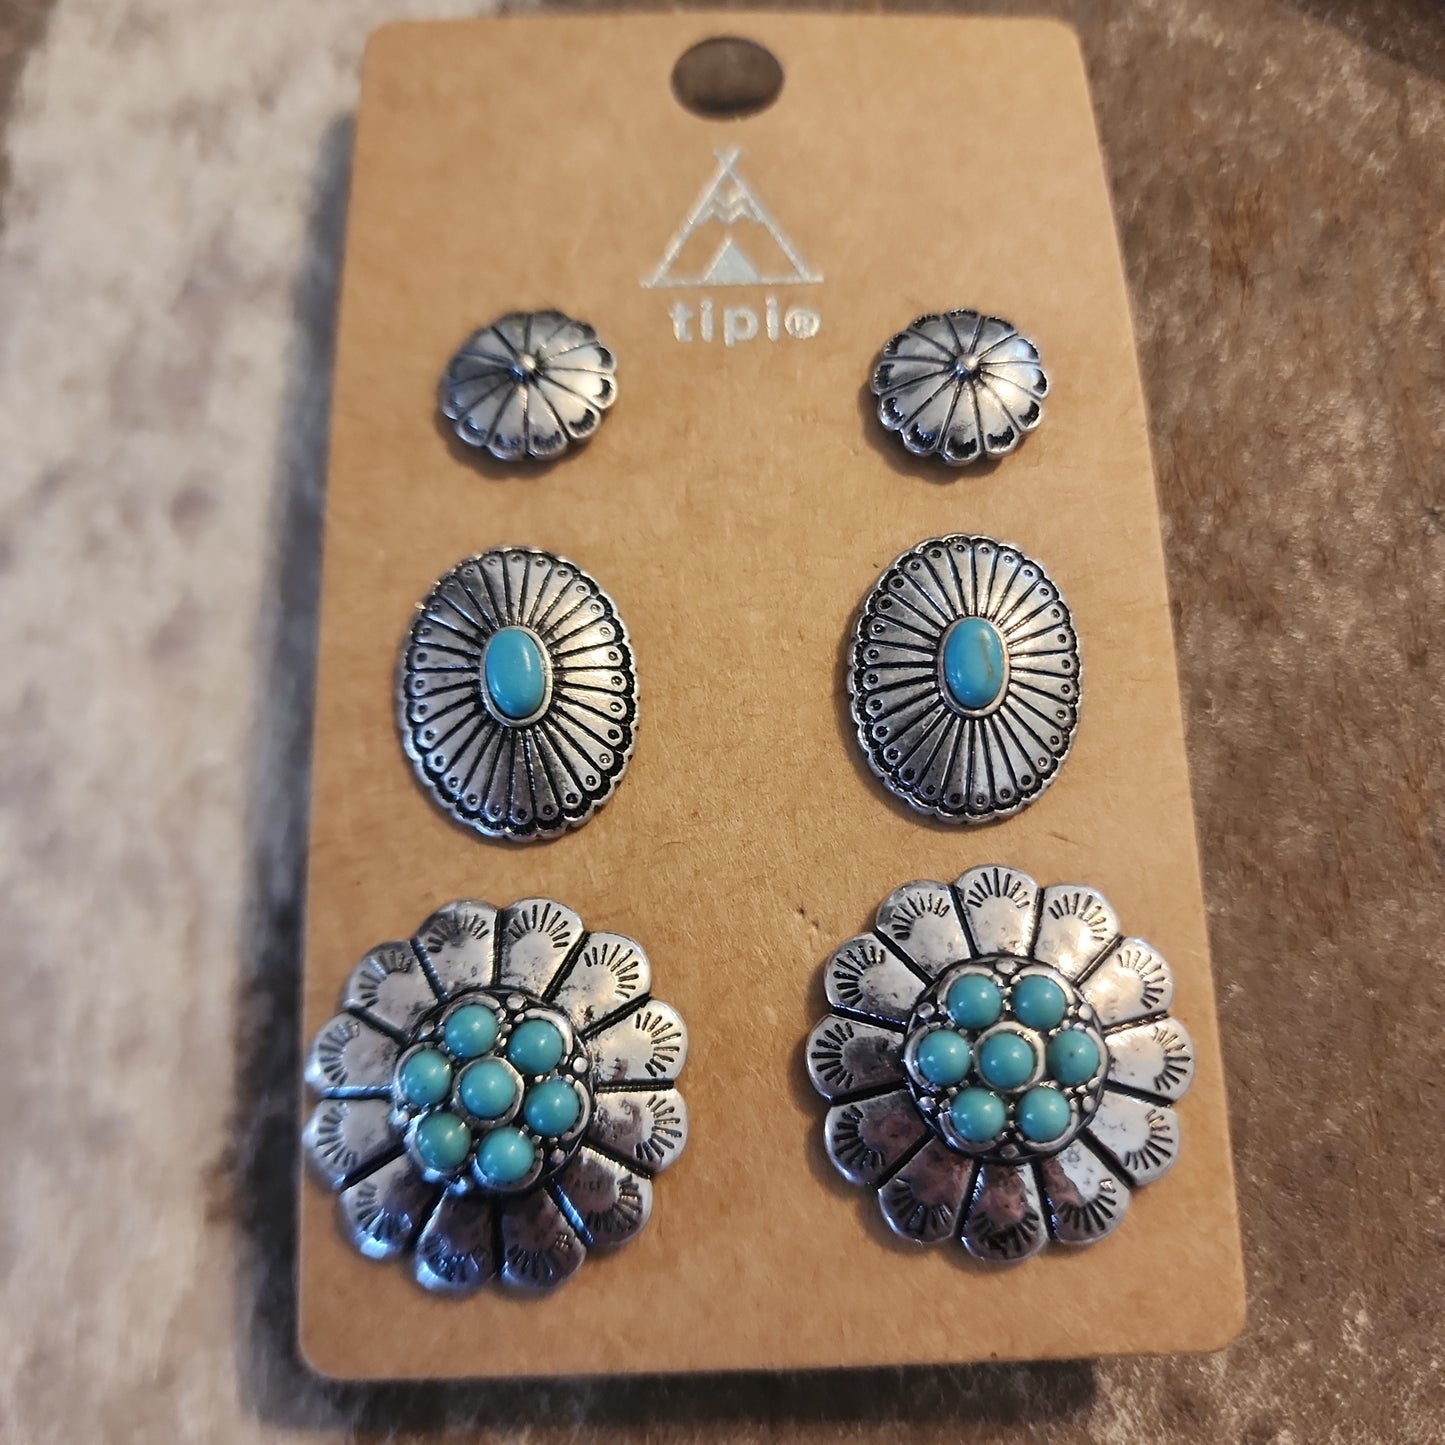 Santa Rita 3 piece stud earrings Turquoise and Coral